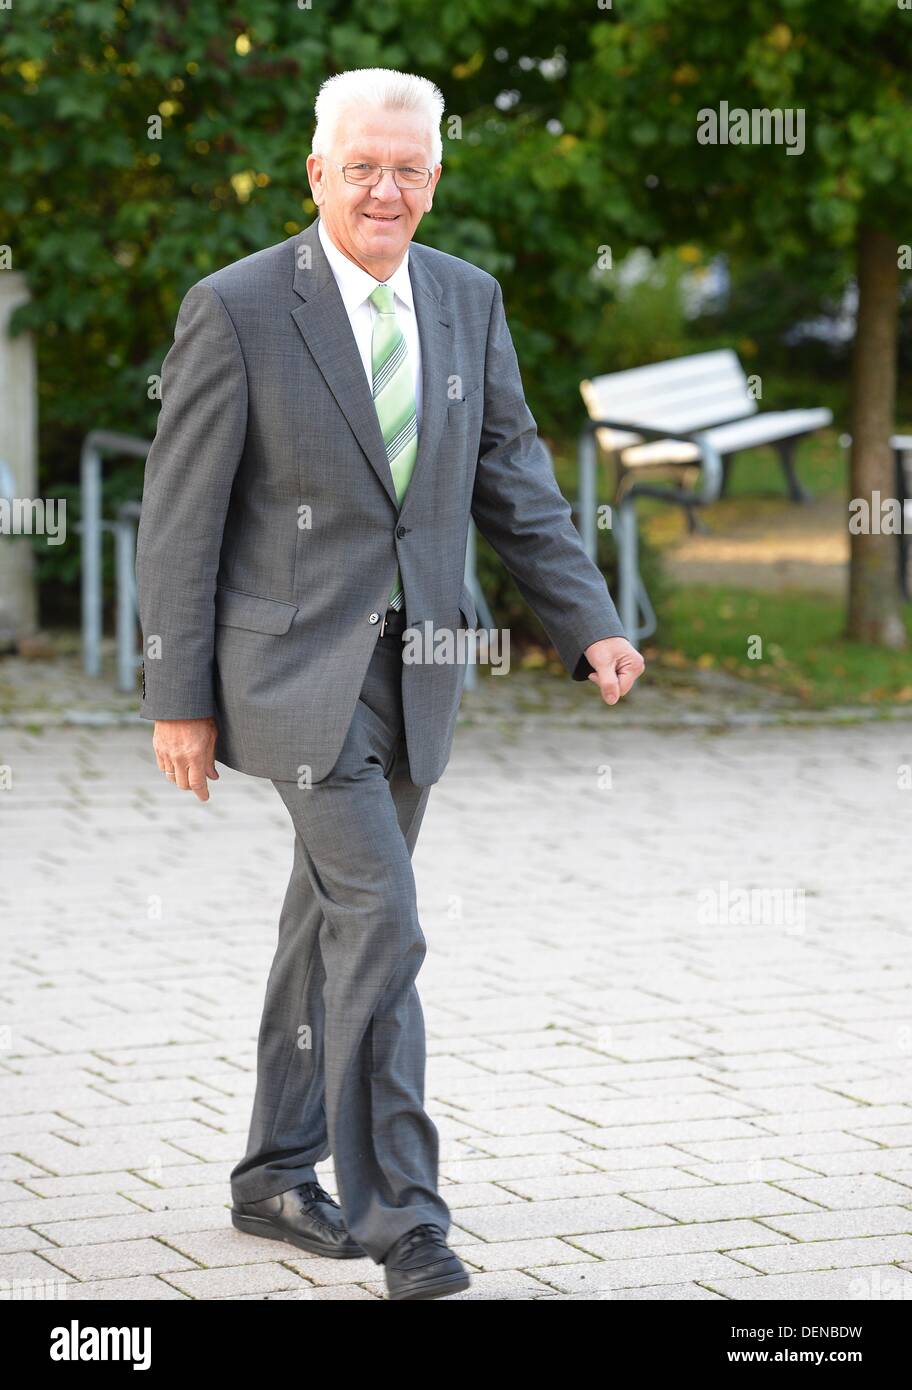 Sigmaringen, Germany. 22nd Sep, 2013. Premier of Baden-Wuerrtemberg Winfried Kretschmann (L) arrives at a polling station at city hall for the 2013 German federal elections in Laiz near Sigmaringen, Germany, 22 September 2013. Photo: BERND WEISSBROD/dpa/Alamy Live News Stock Photo